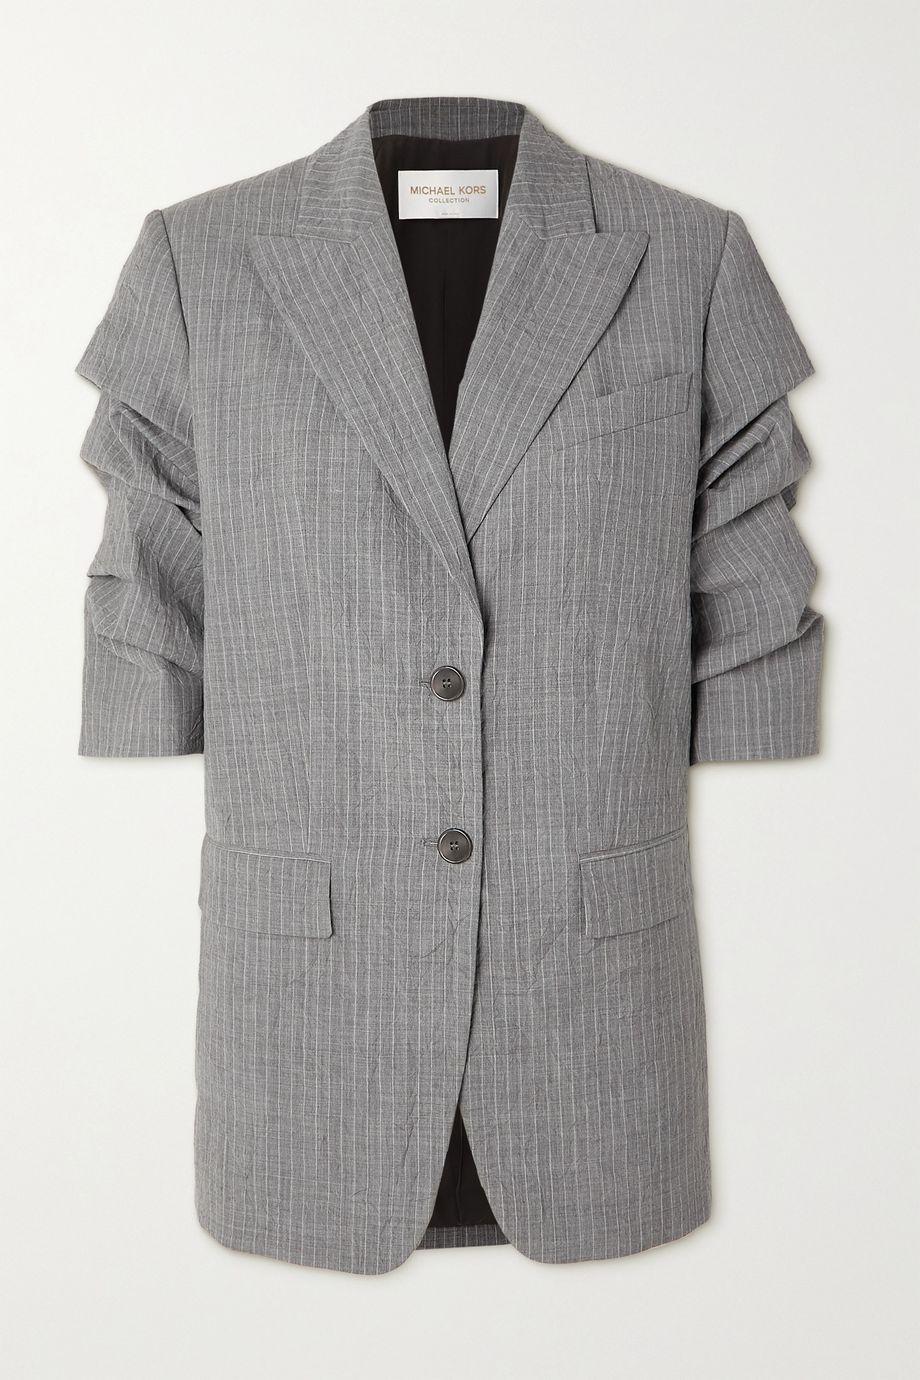 Gathered pinstriped crinkled-wool blazer by MICHAEL KORS